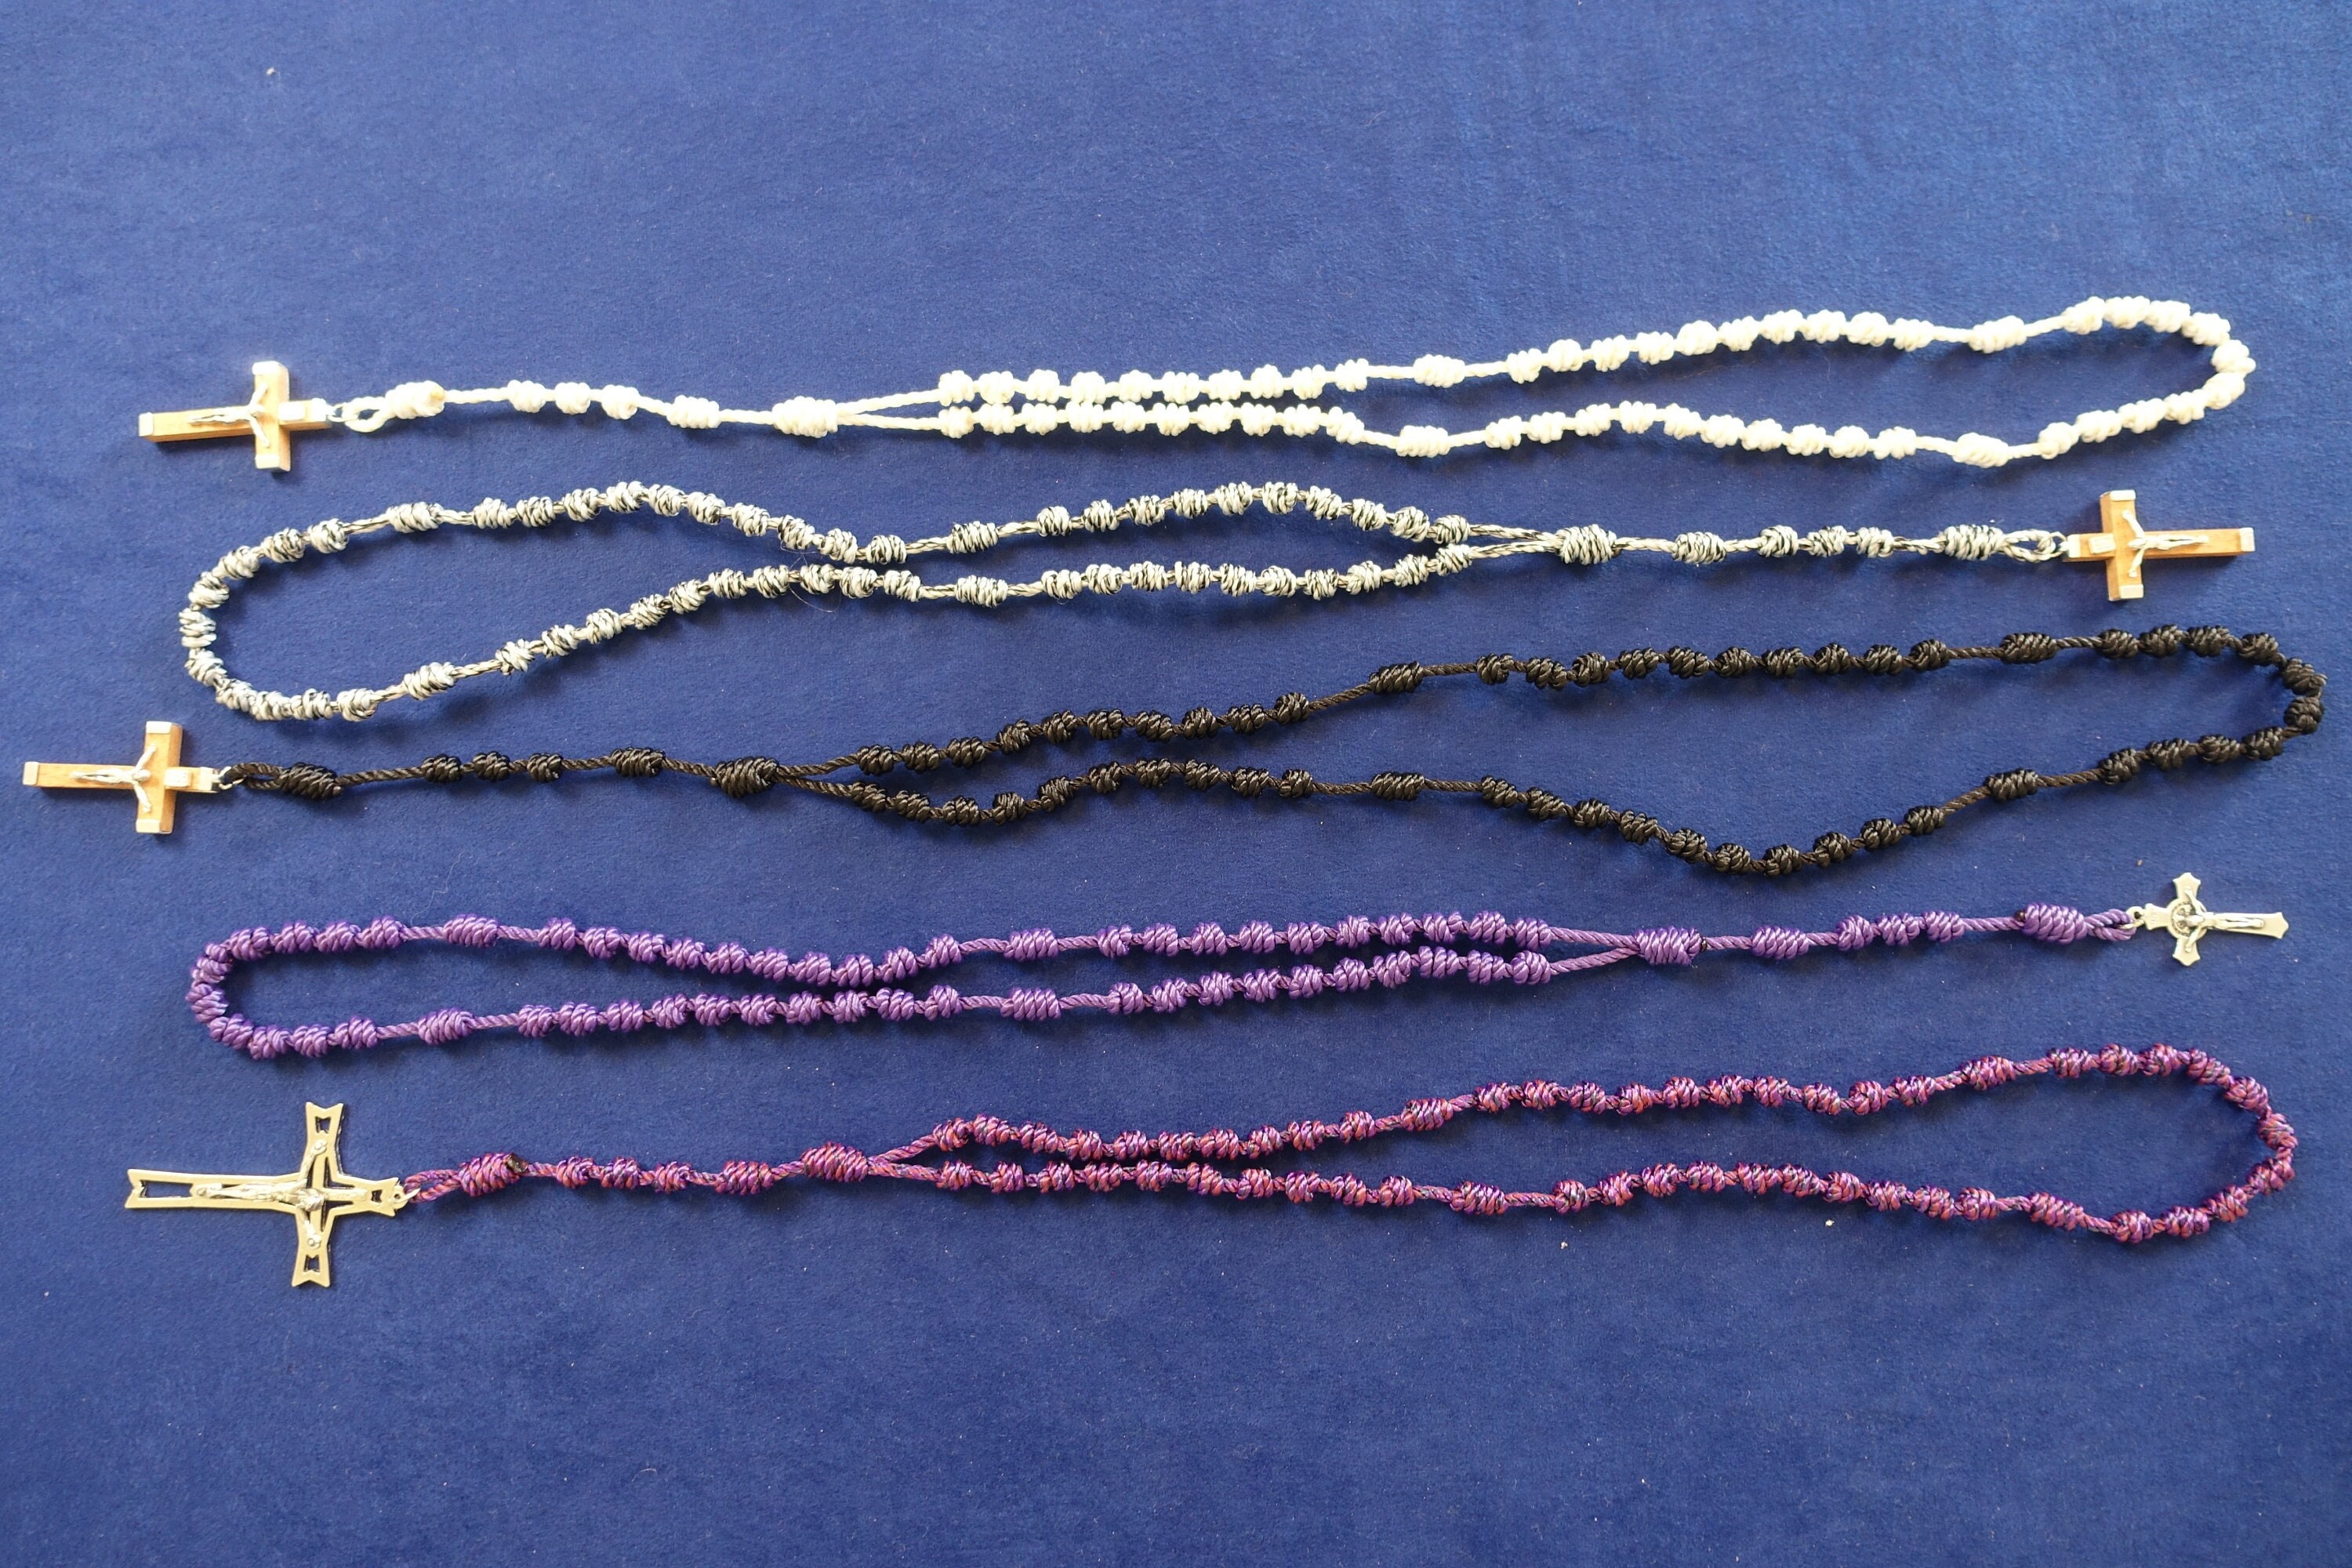  Black Knotted Rosary, Durable Twine Prayer Necklace